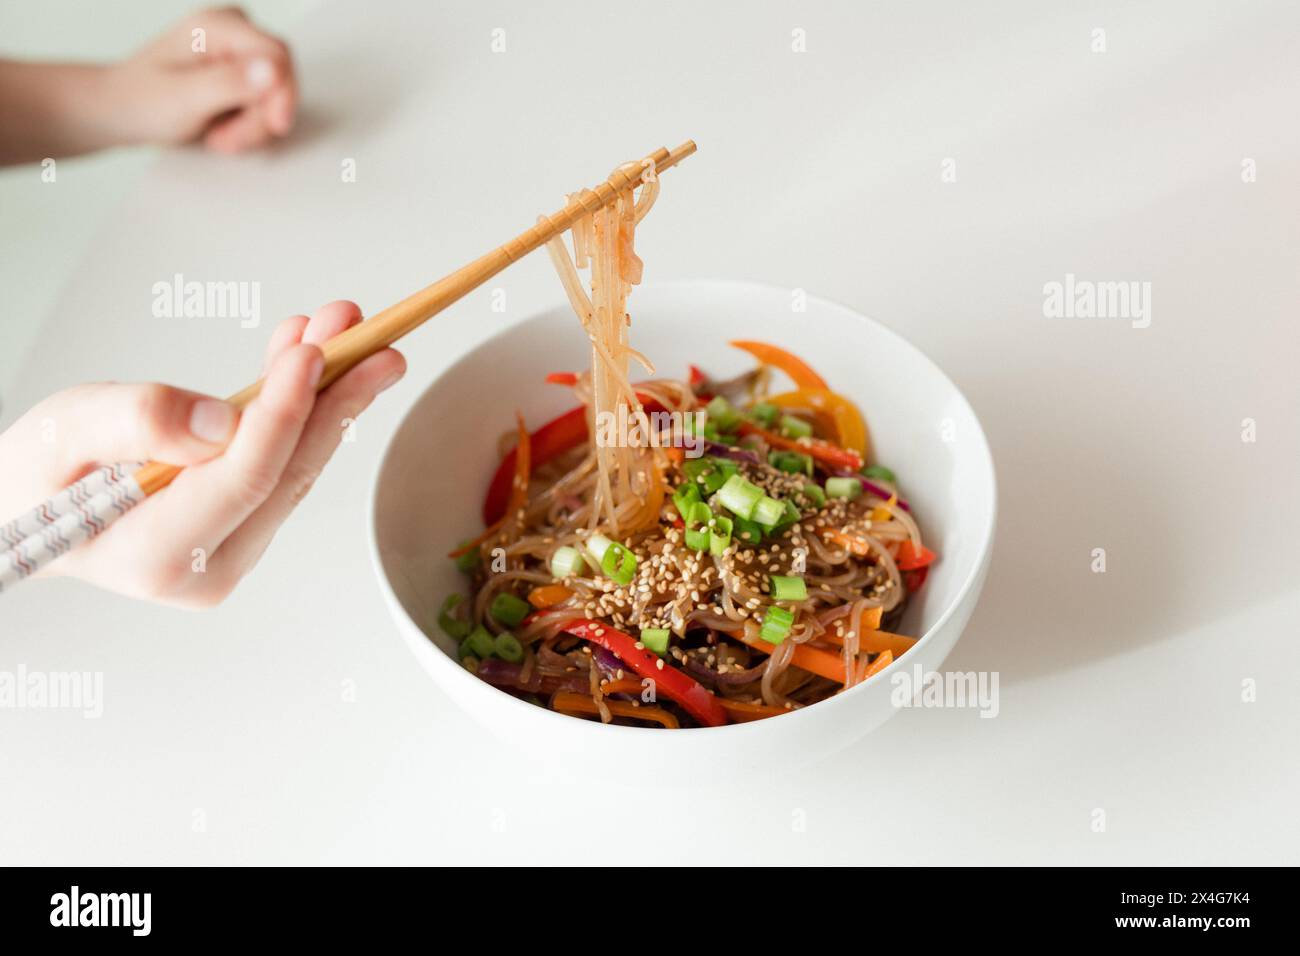 Enjoying a bowl of colorful vegetable noodles with chopsticks Stock Photo